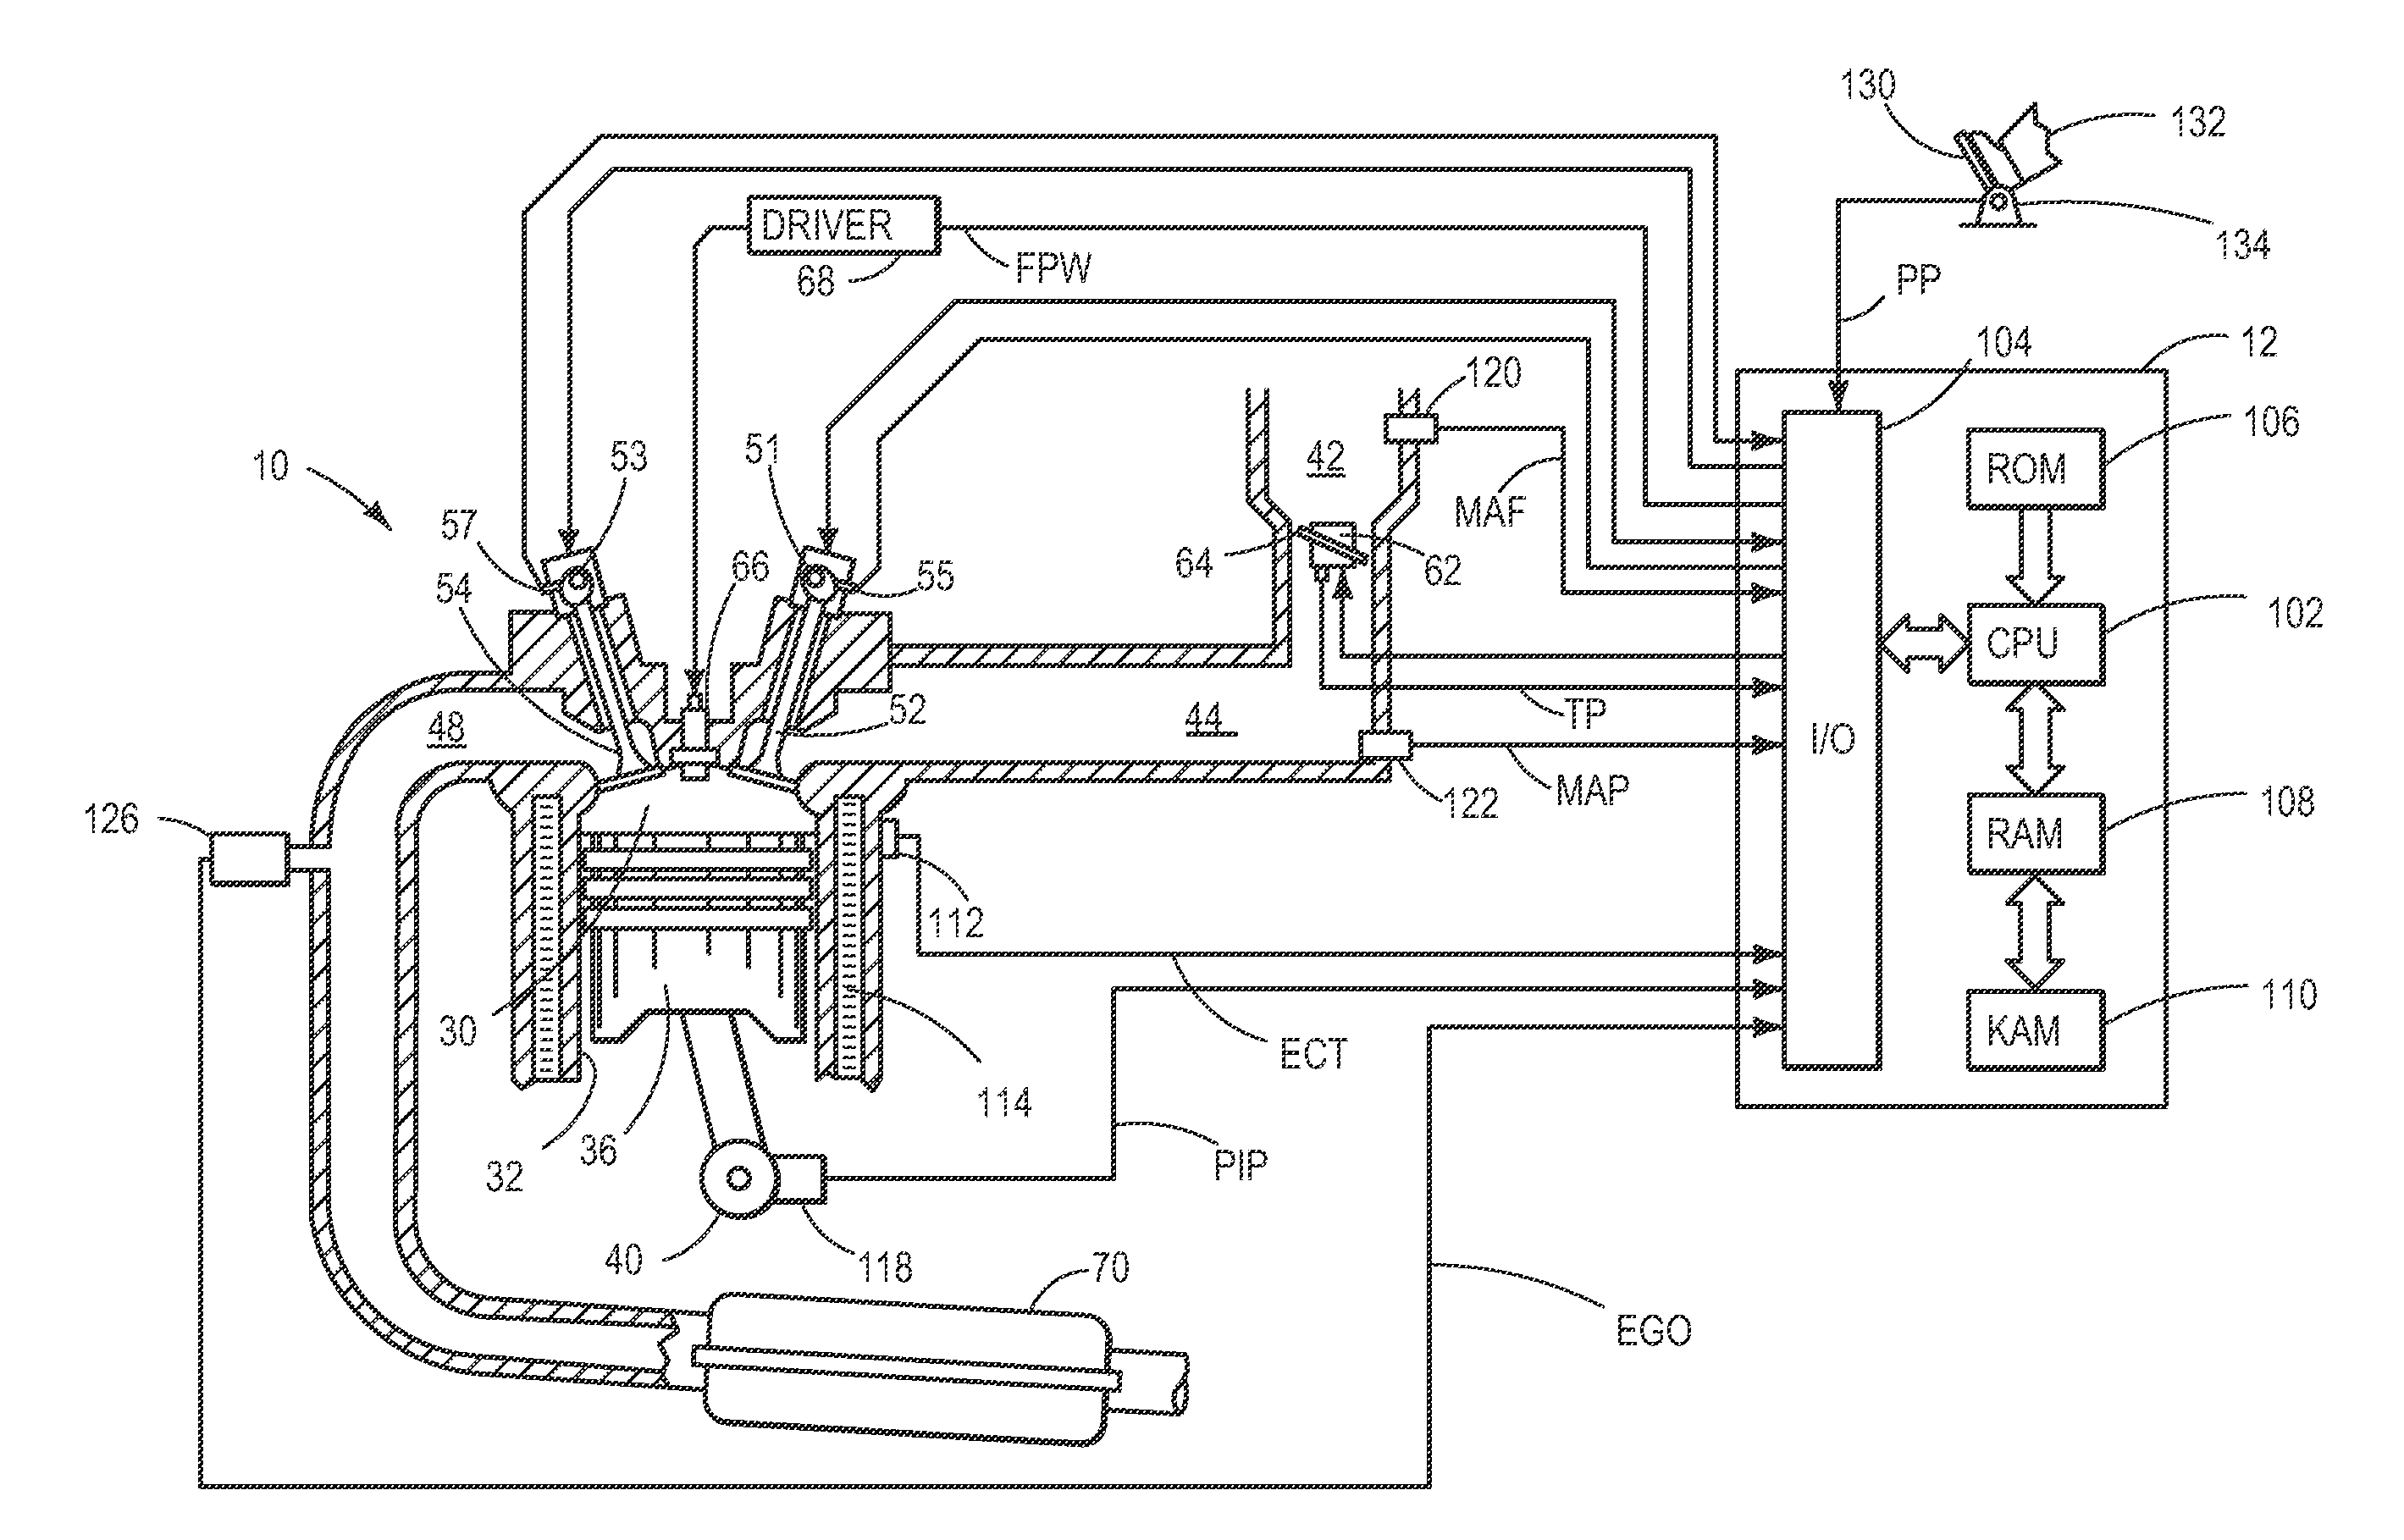 Systems and methods for an exhaust gas treatment system